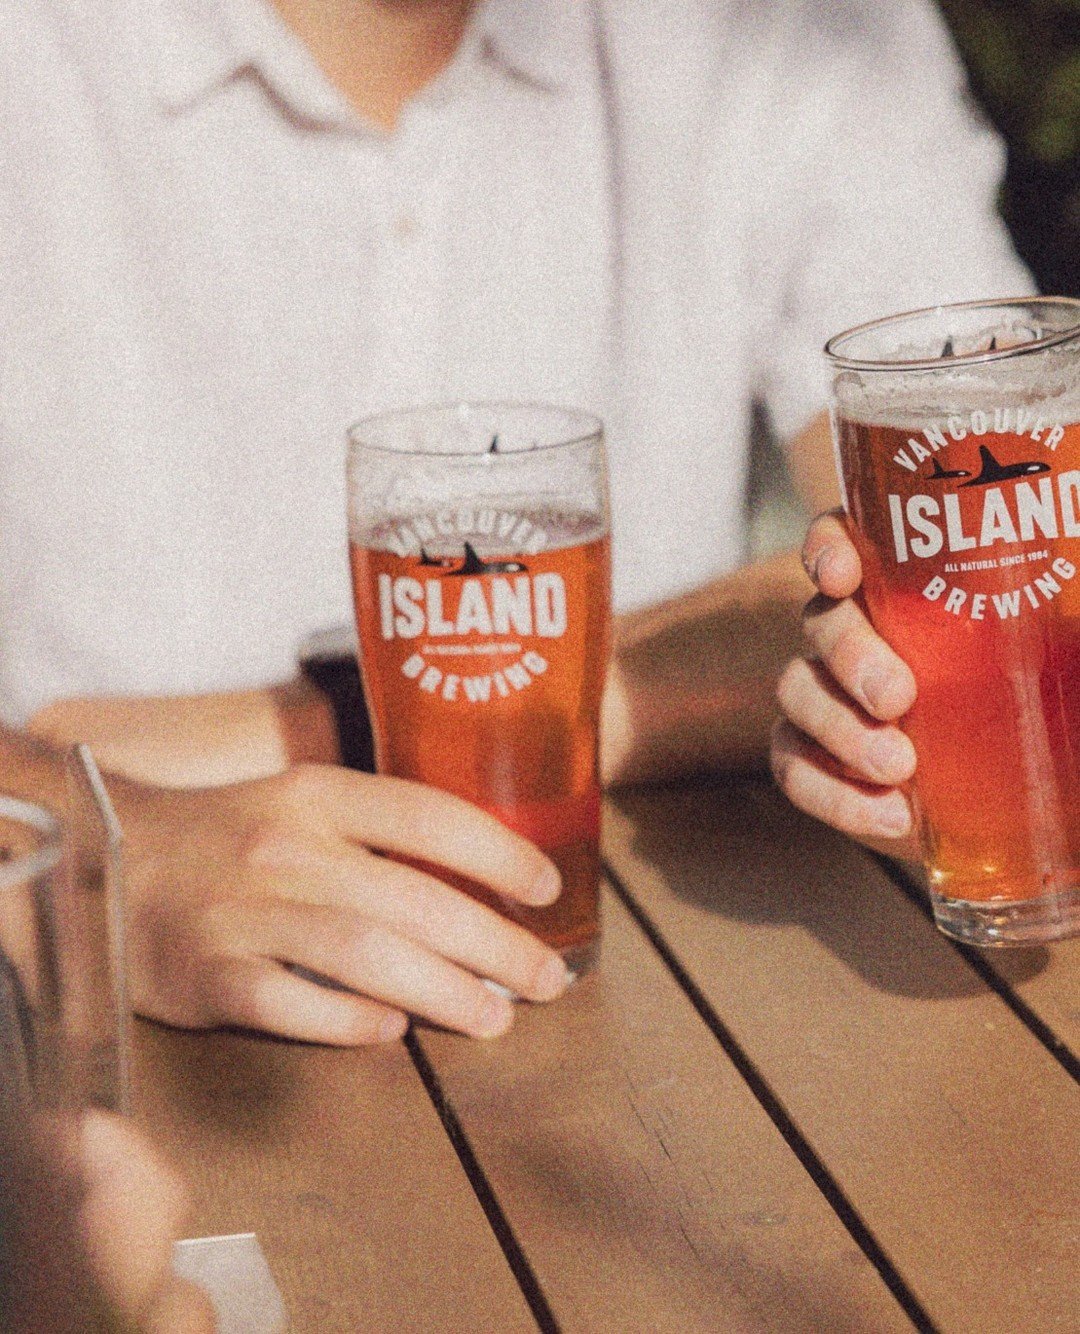 Weekend plans?🍻⁠
Whether you're out exploring or kicking back on the patio - Beach Shack Guava Blonde is along for the ride and ready to bring the party 🏖️⁠
⁠
Easy-drinking, bursting with juicy guava notes and a smooth malt finish. ⁠
⁠
ABV: 5.2%⁠
I